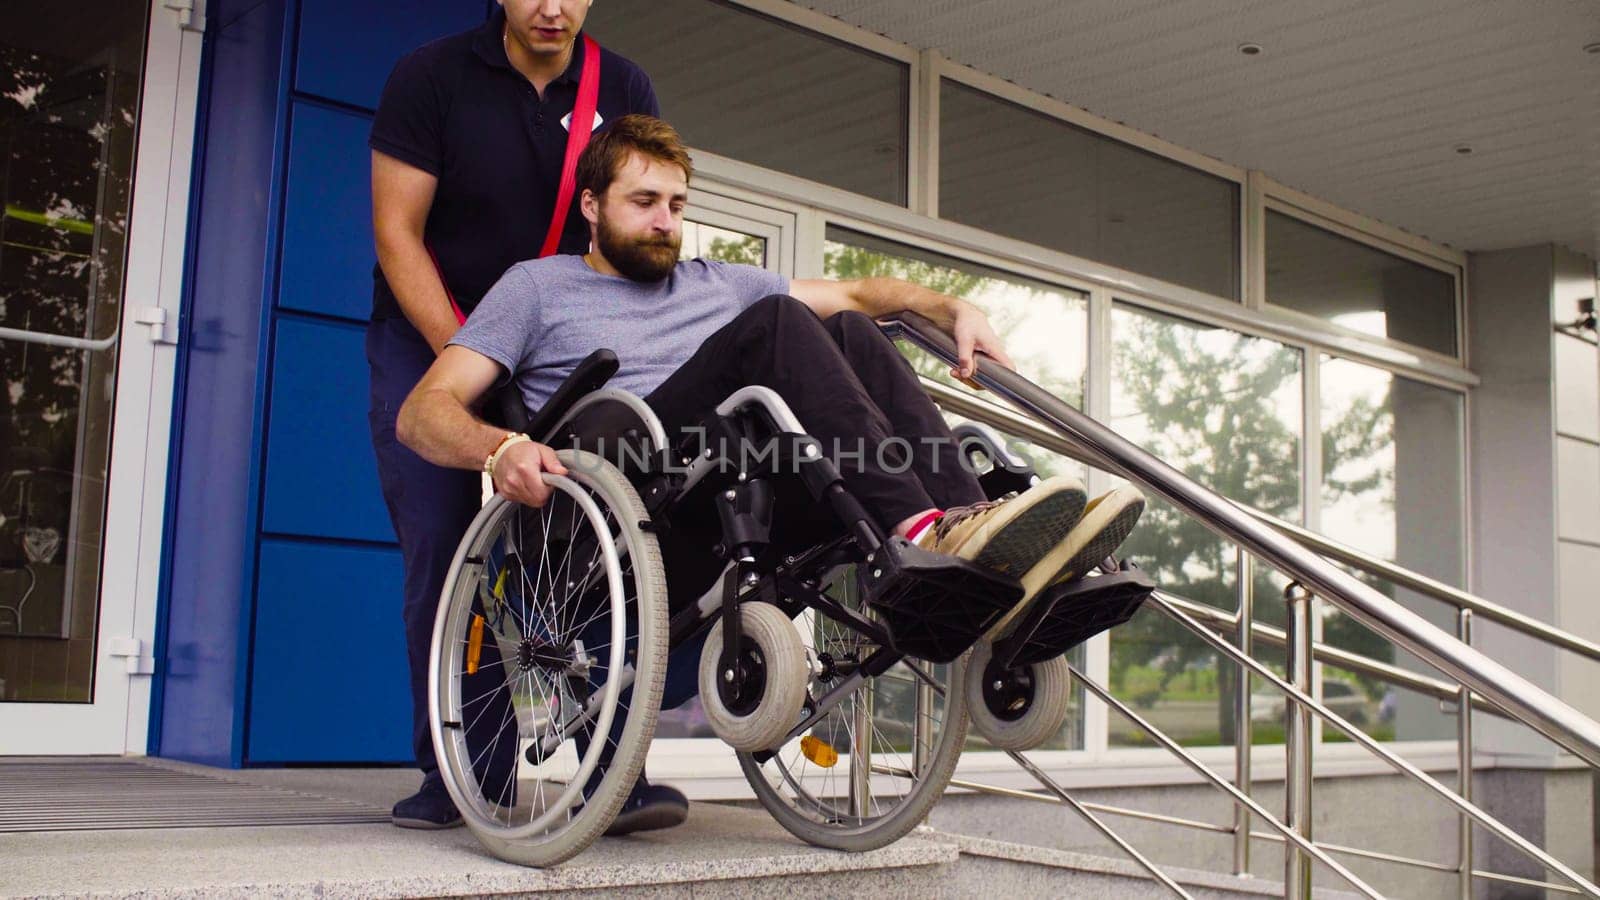 A man helping to move down the stairs to a disabled person in a wheelchair